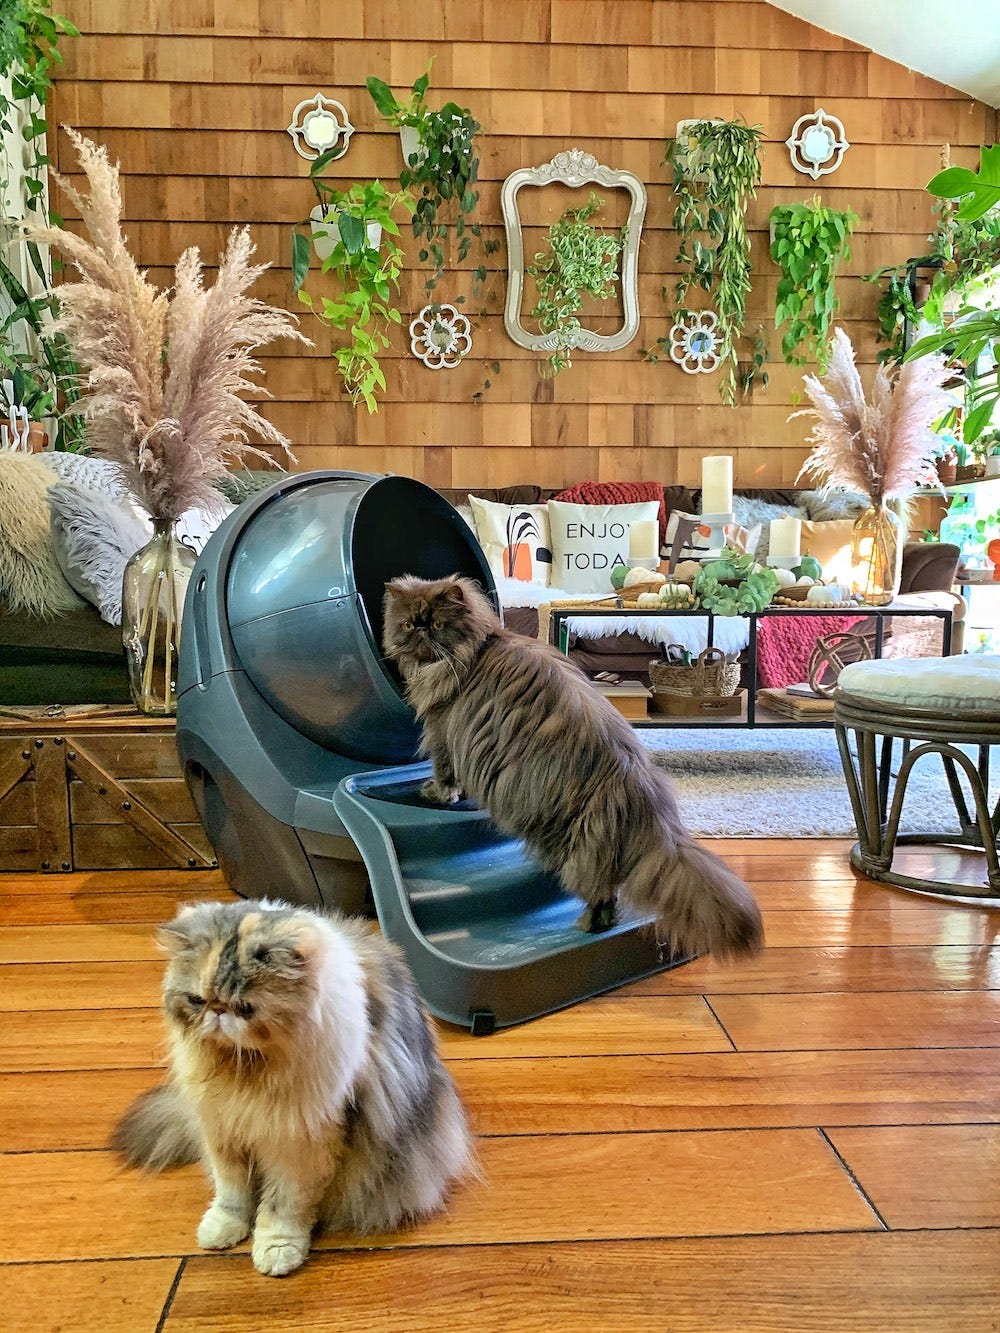 Two Persians with Litter-Robot